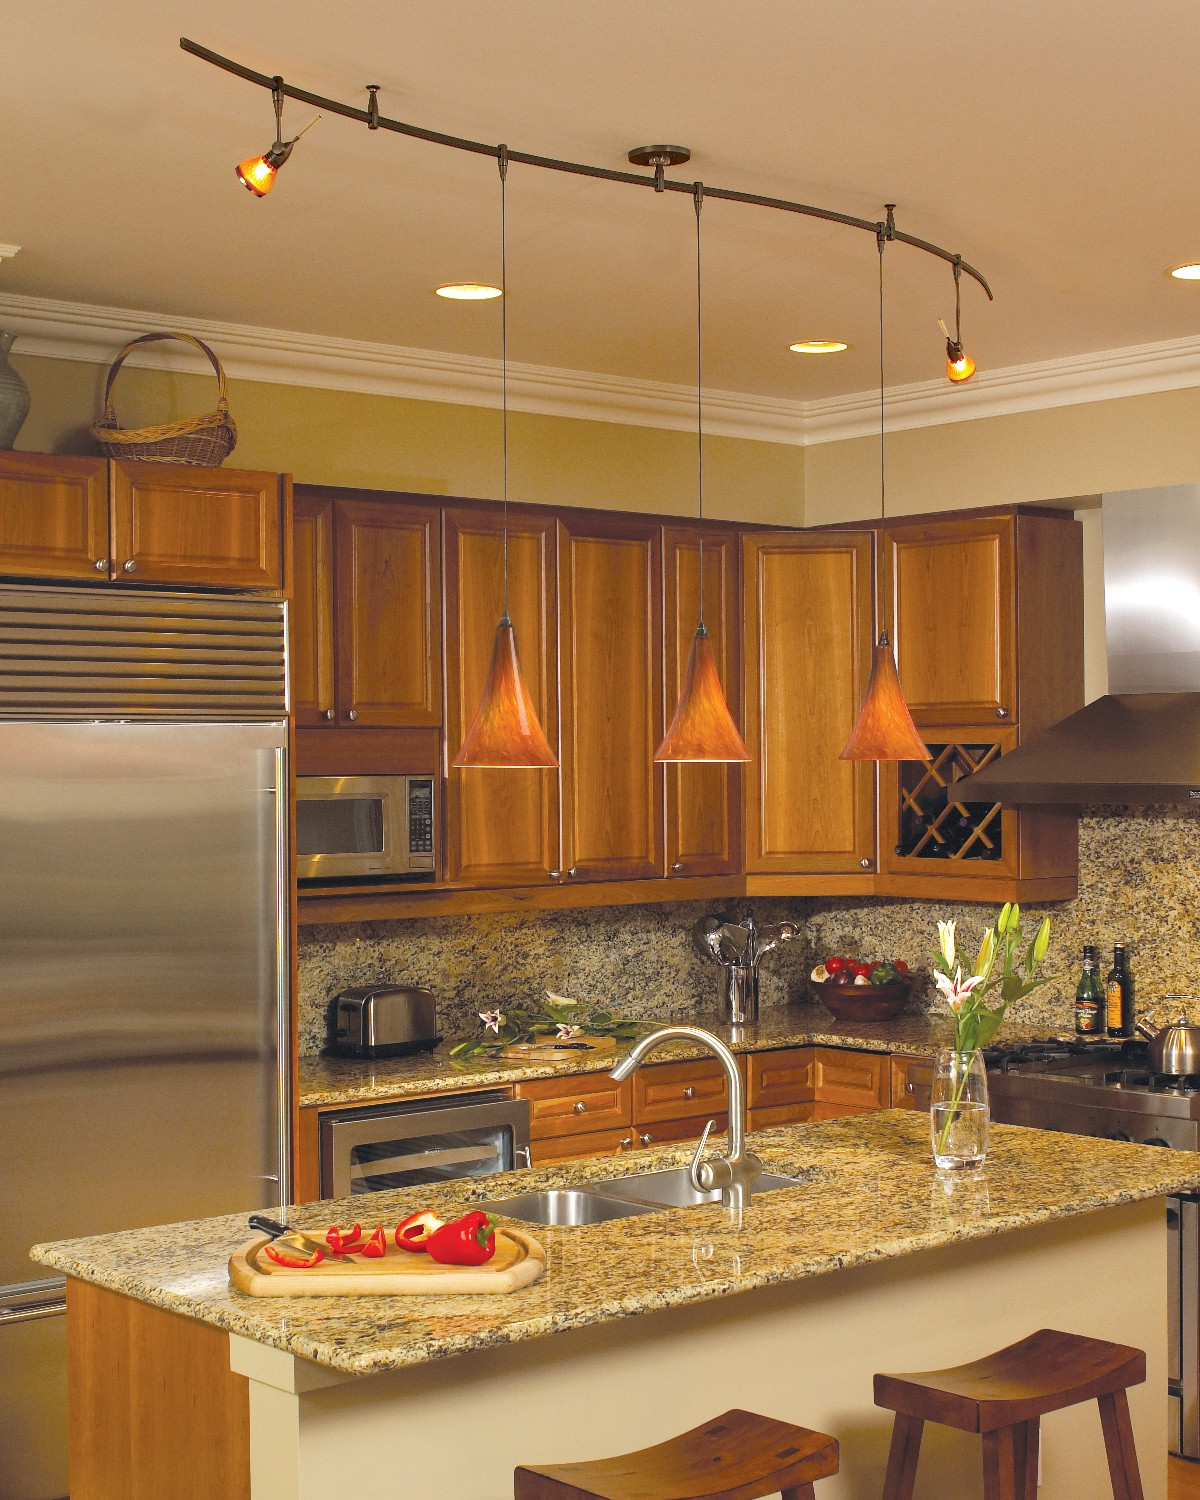 Track Lighting In Kitchen
 A TECH Lighting Guide How to Order Track Lighting